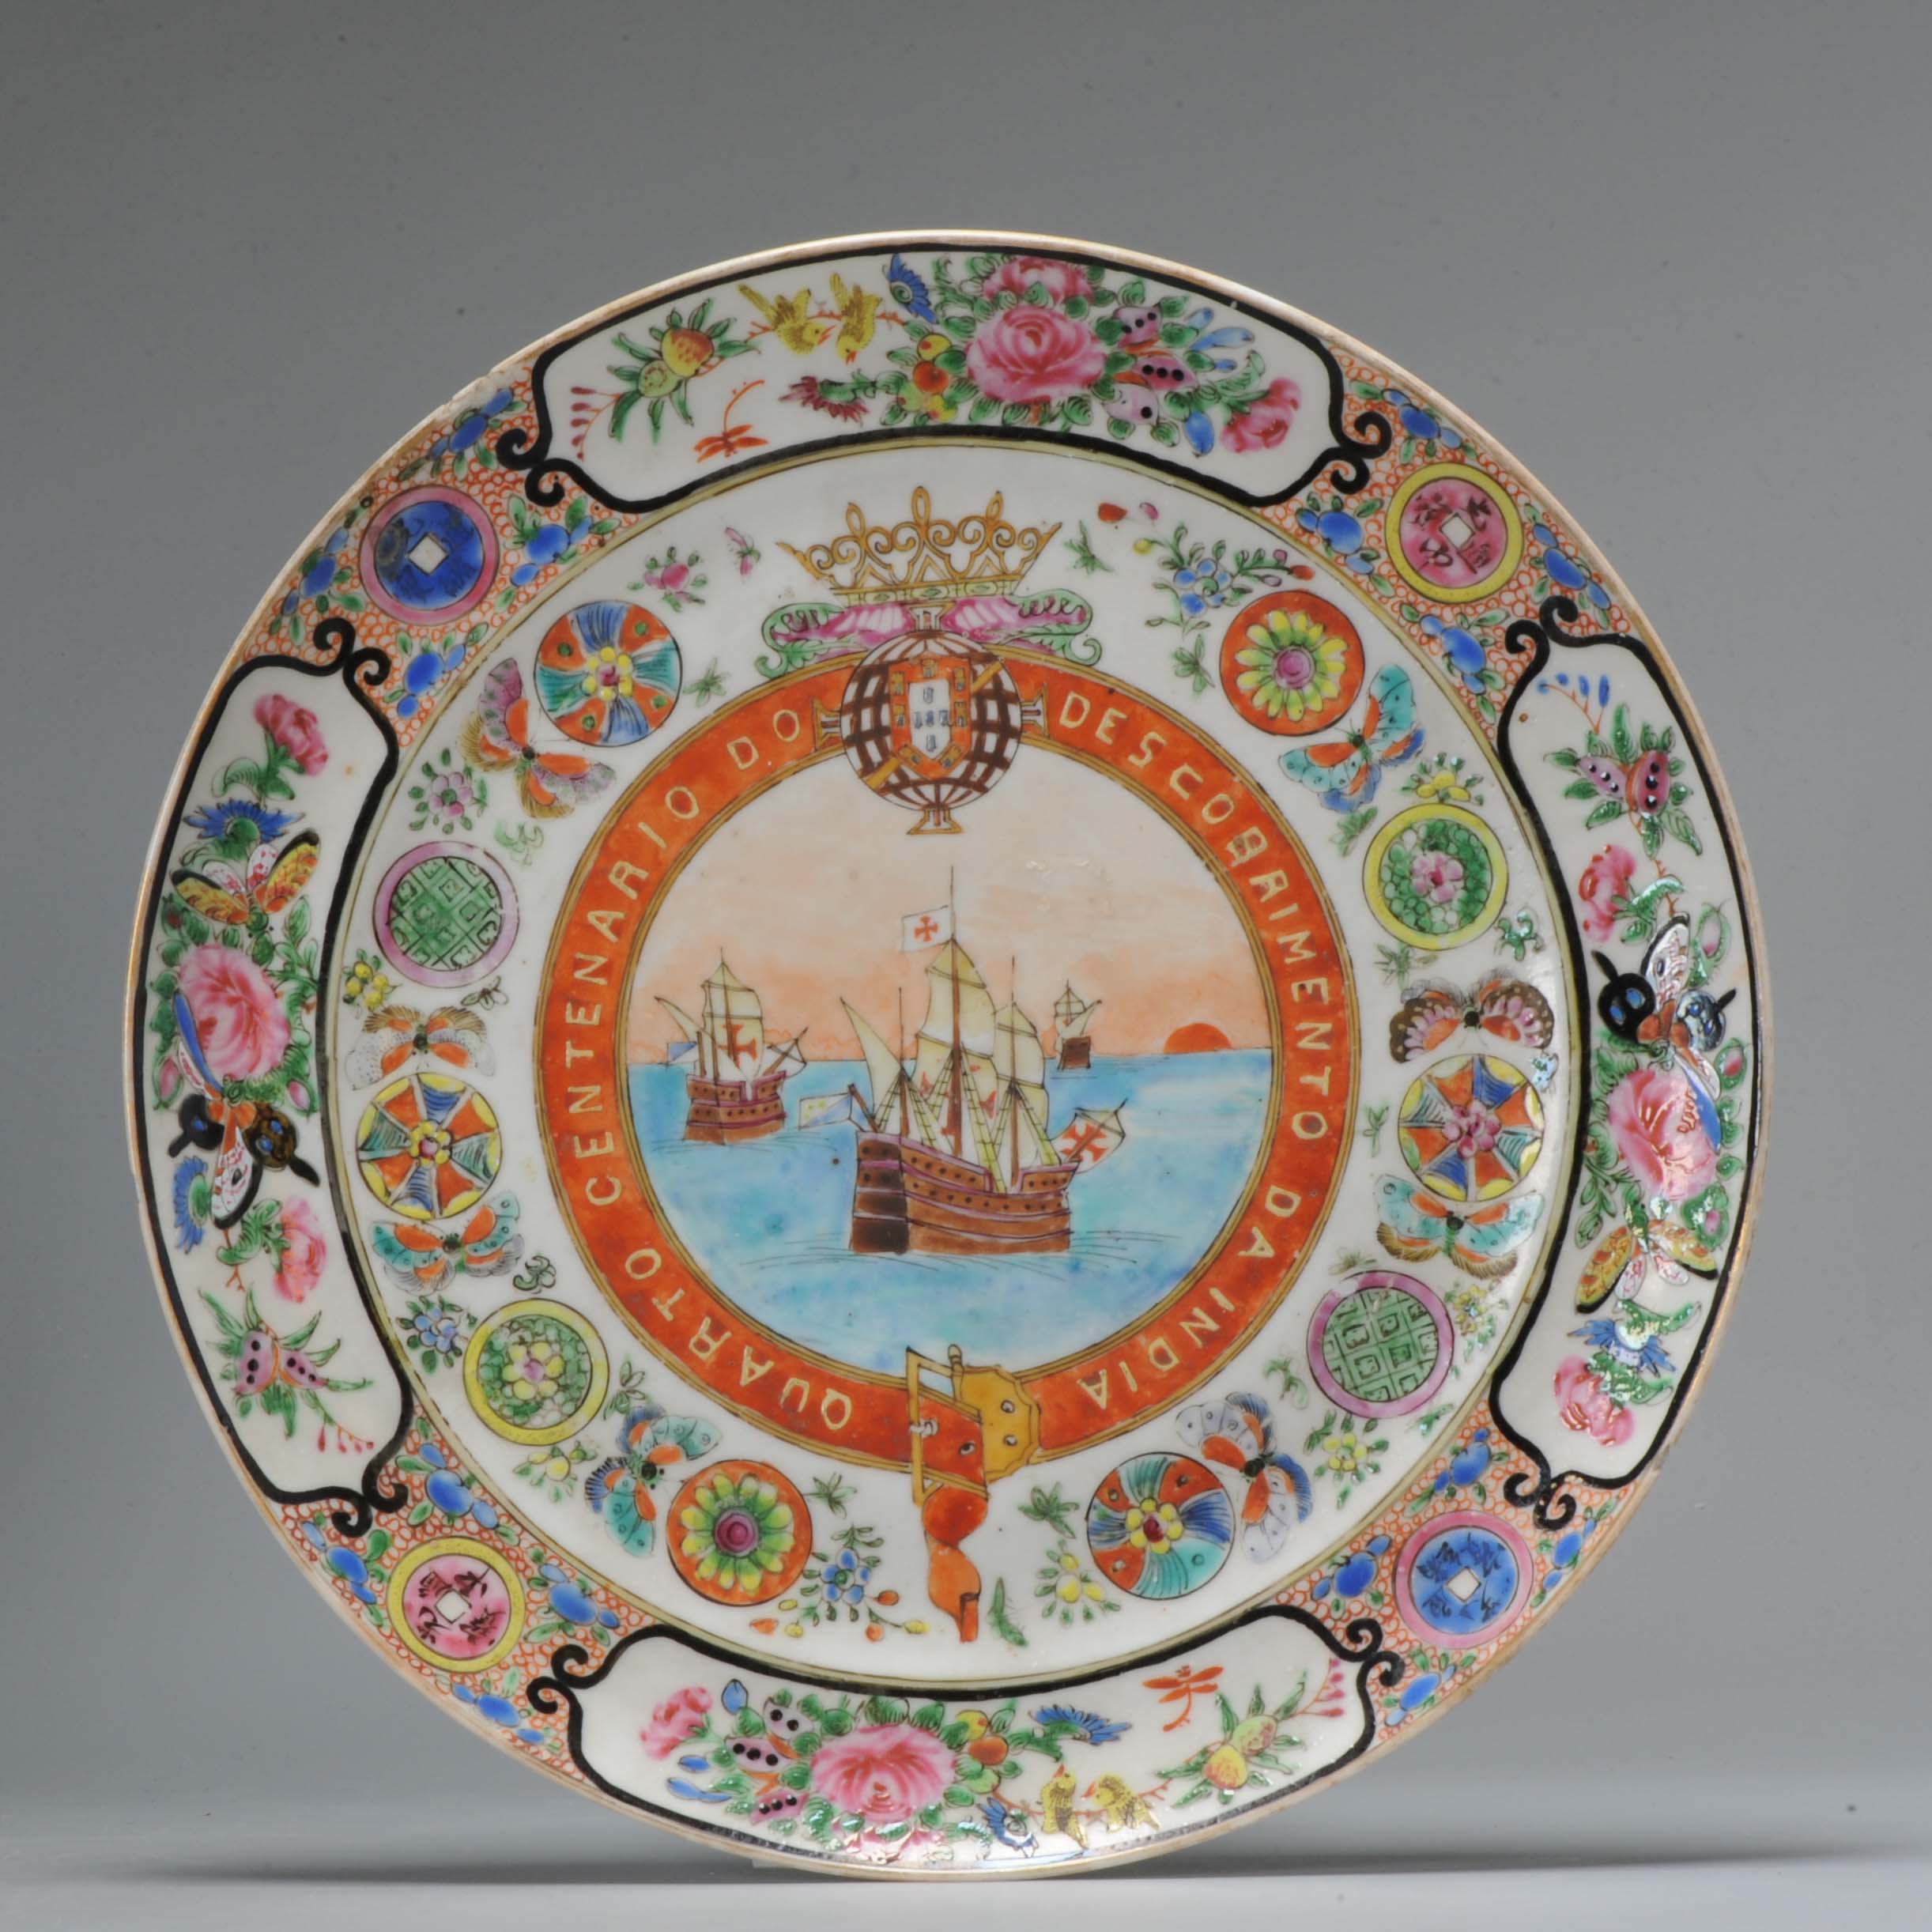 1023  A ‘CANTON FAMILLE ROSE’ COMMEMORATIVE ARMORIAL PLATE